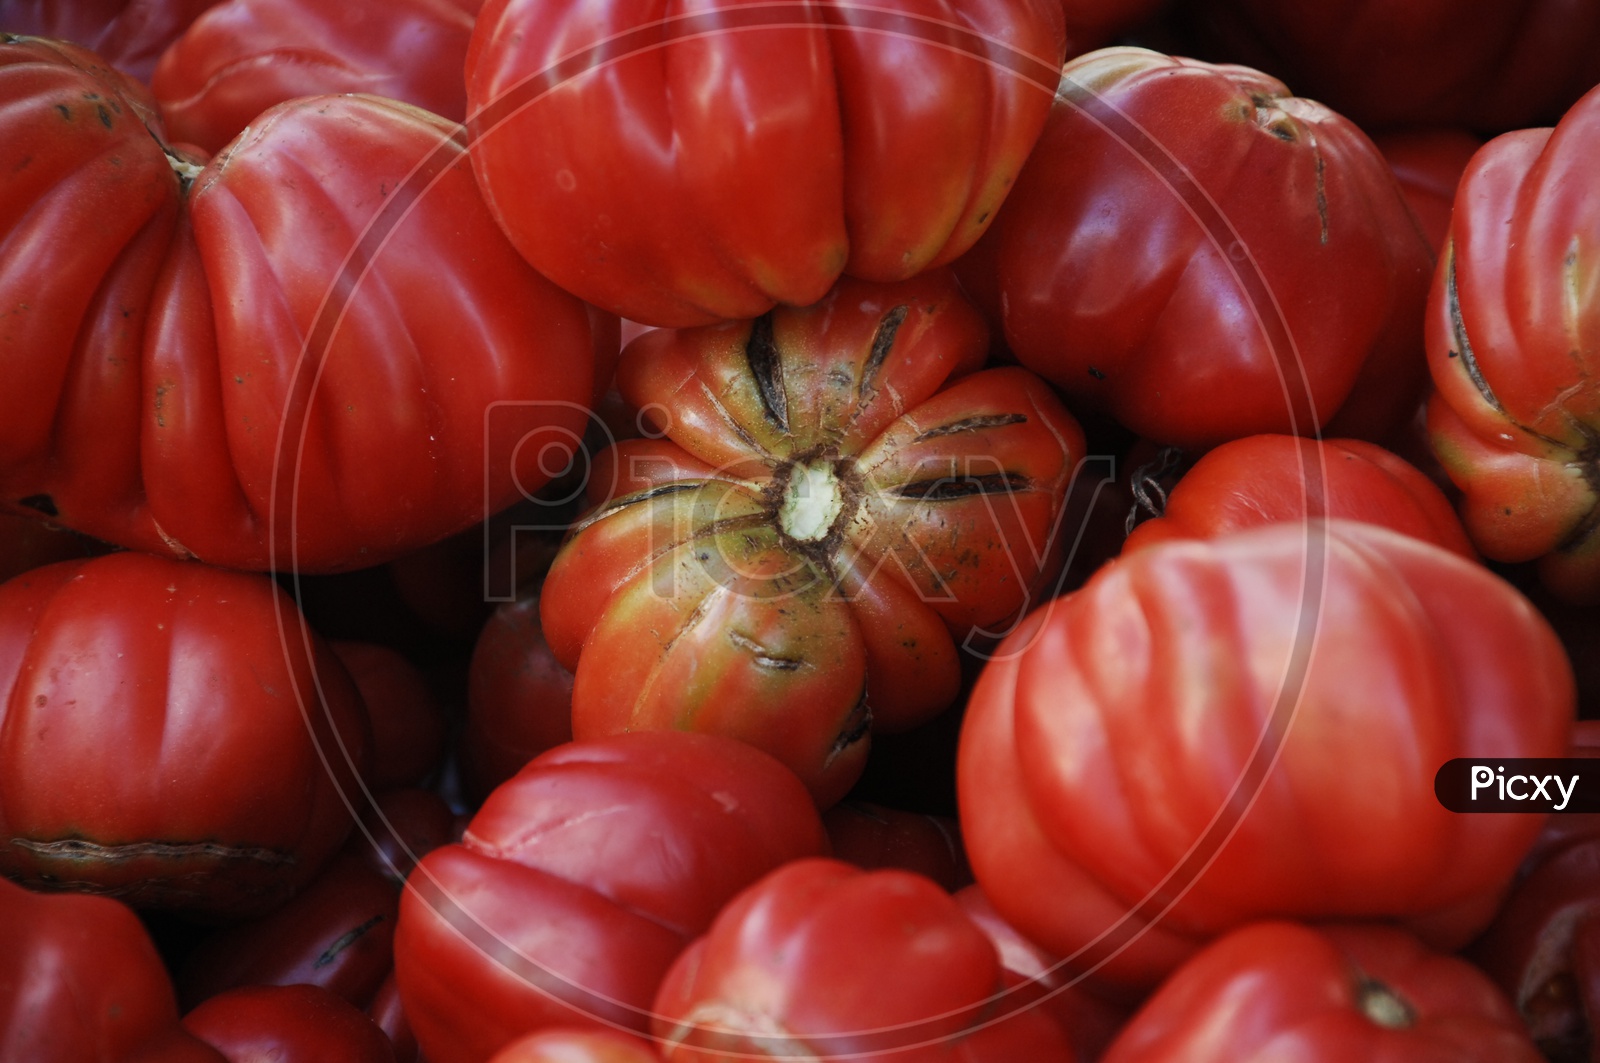 Big red tomatoes